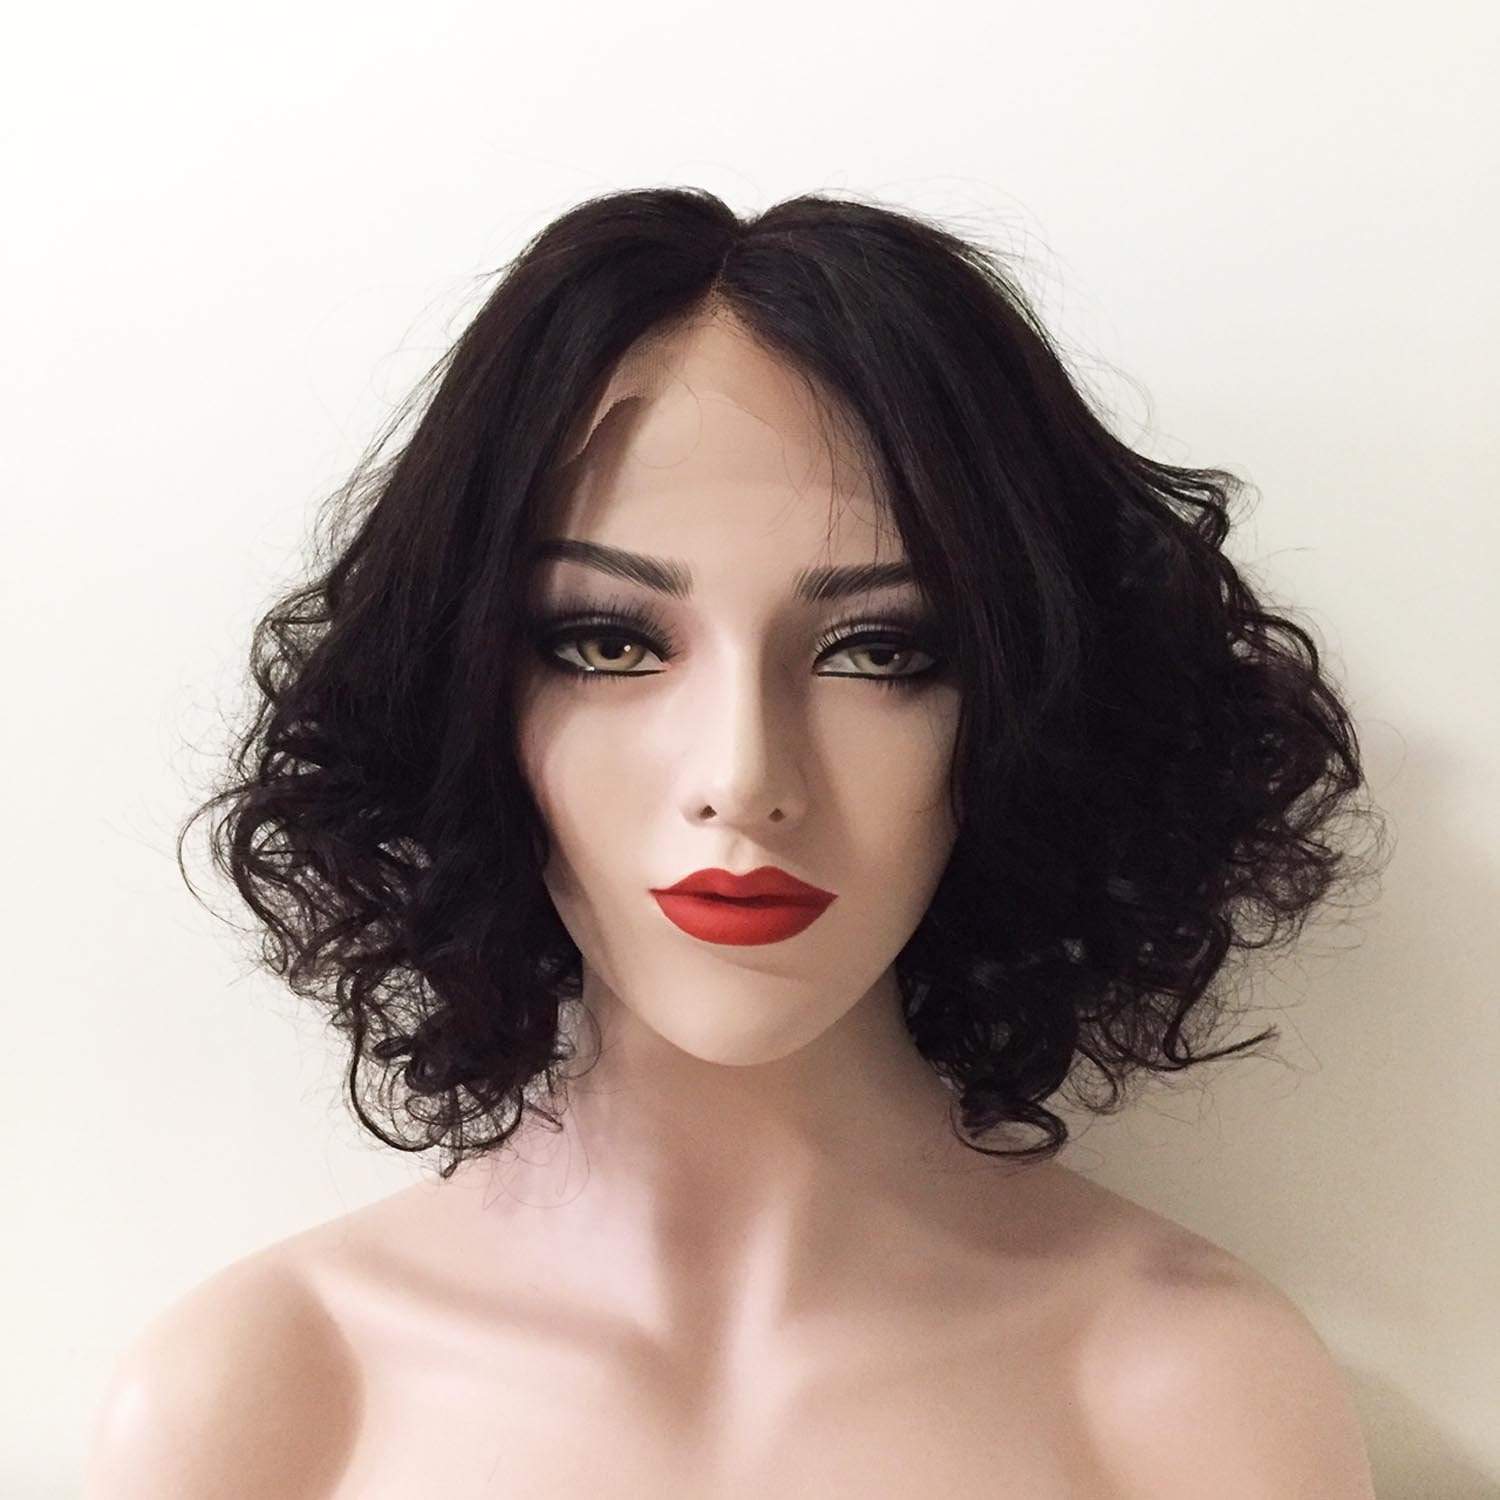 nevermindyrhead Women Black Human Hair Lace Front Short Curly Middle Part Wig